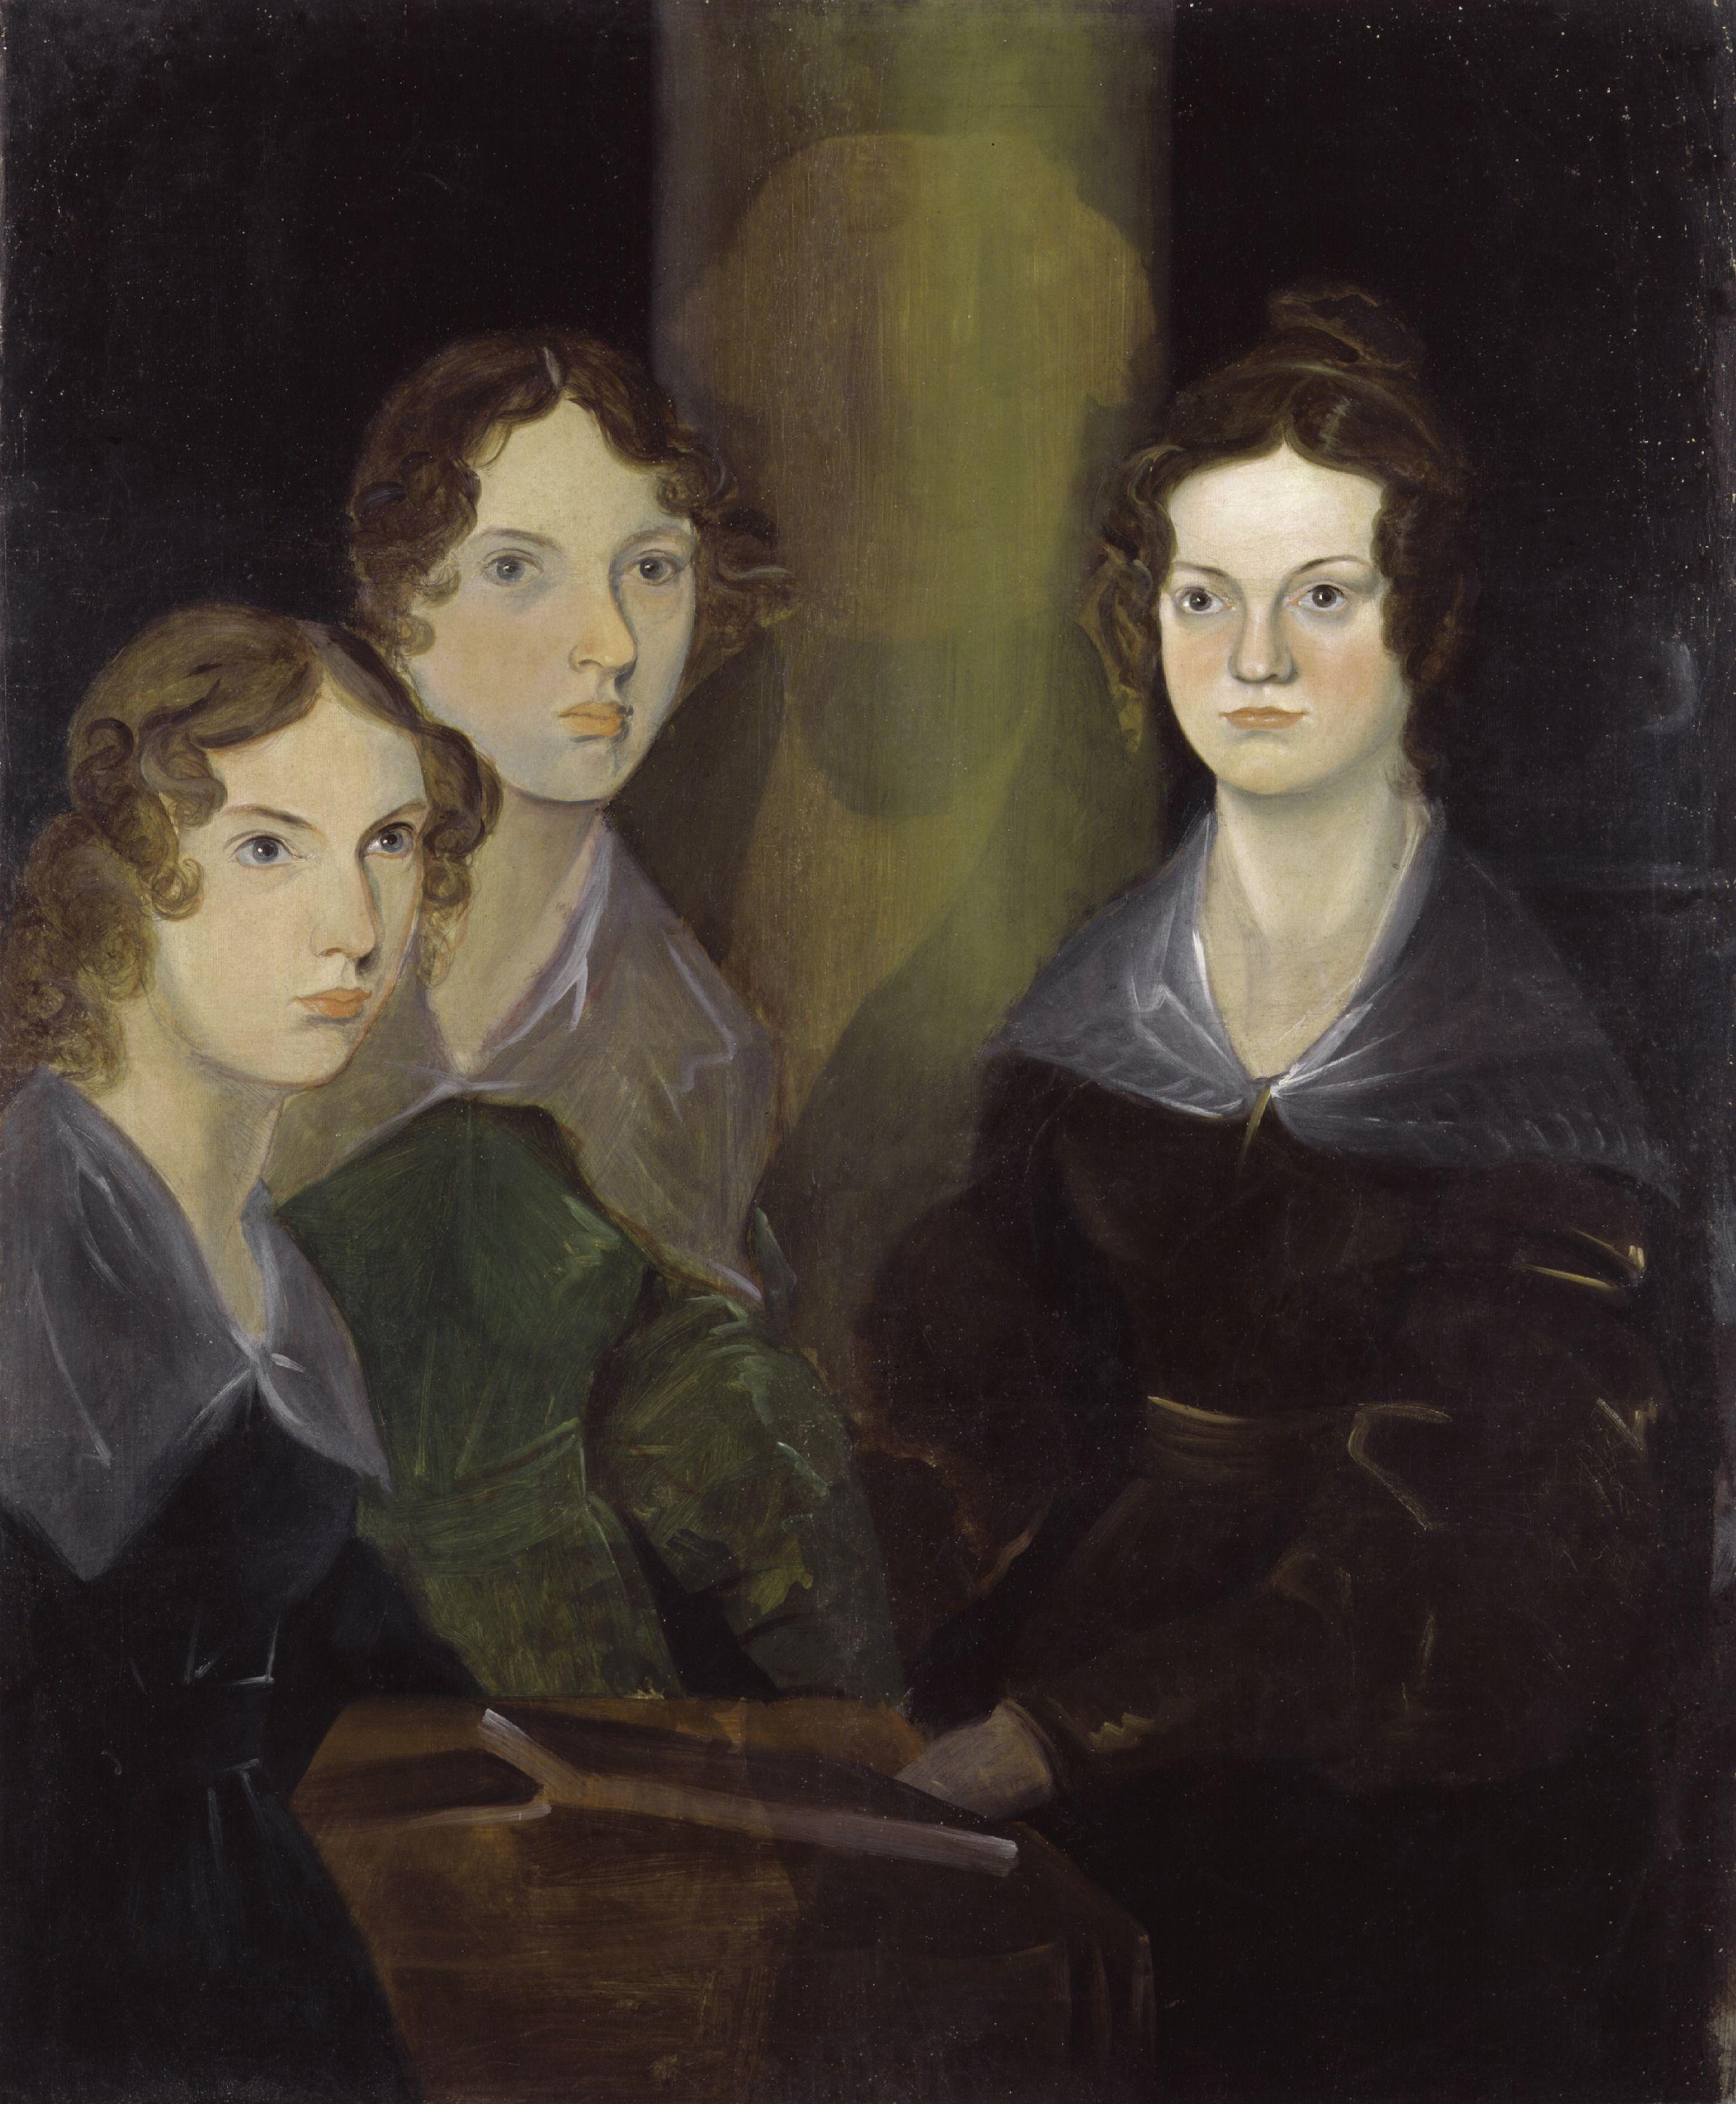 https://upload.wikimedia.org/wikipedia/commons/a/ab/The_Bront%C3%AB_Sisters_by_Patrick_Branwell_Bront%C3%AB_restored.jpg